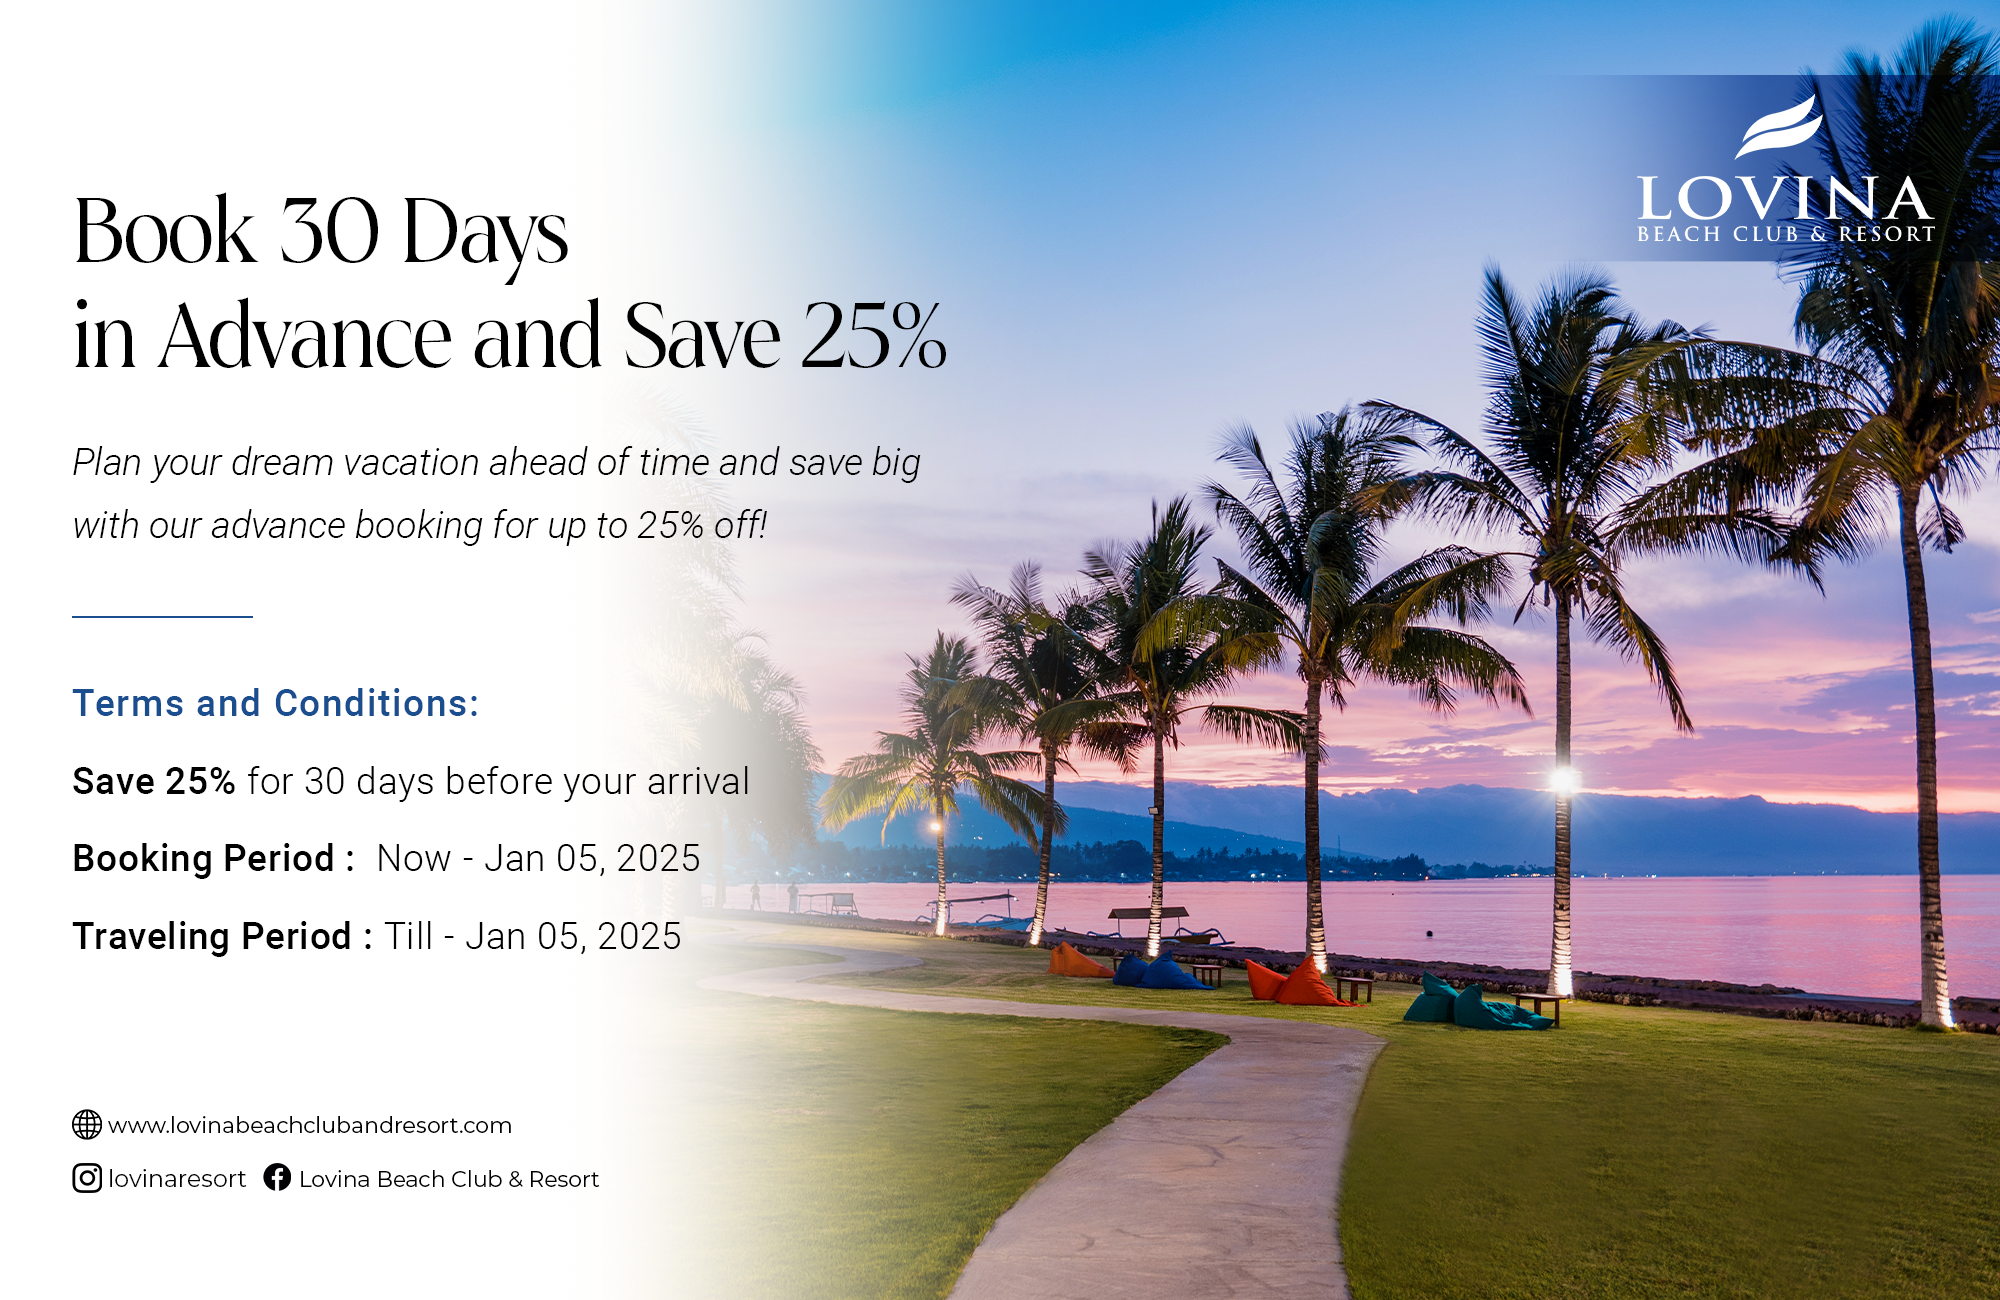 Book 30 Days in Advance and Save 25%